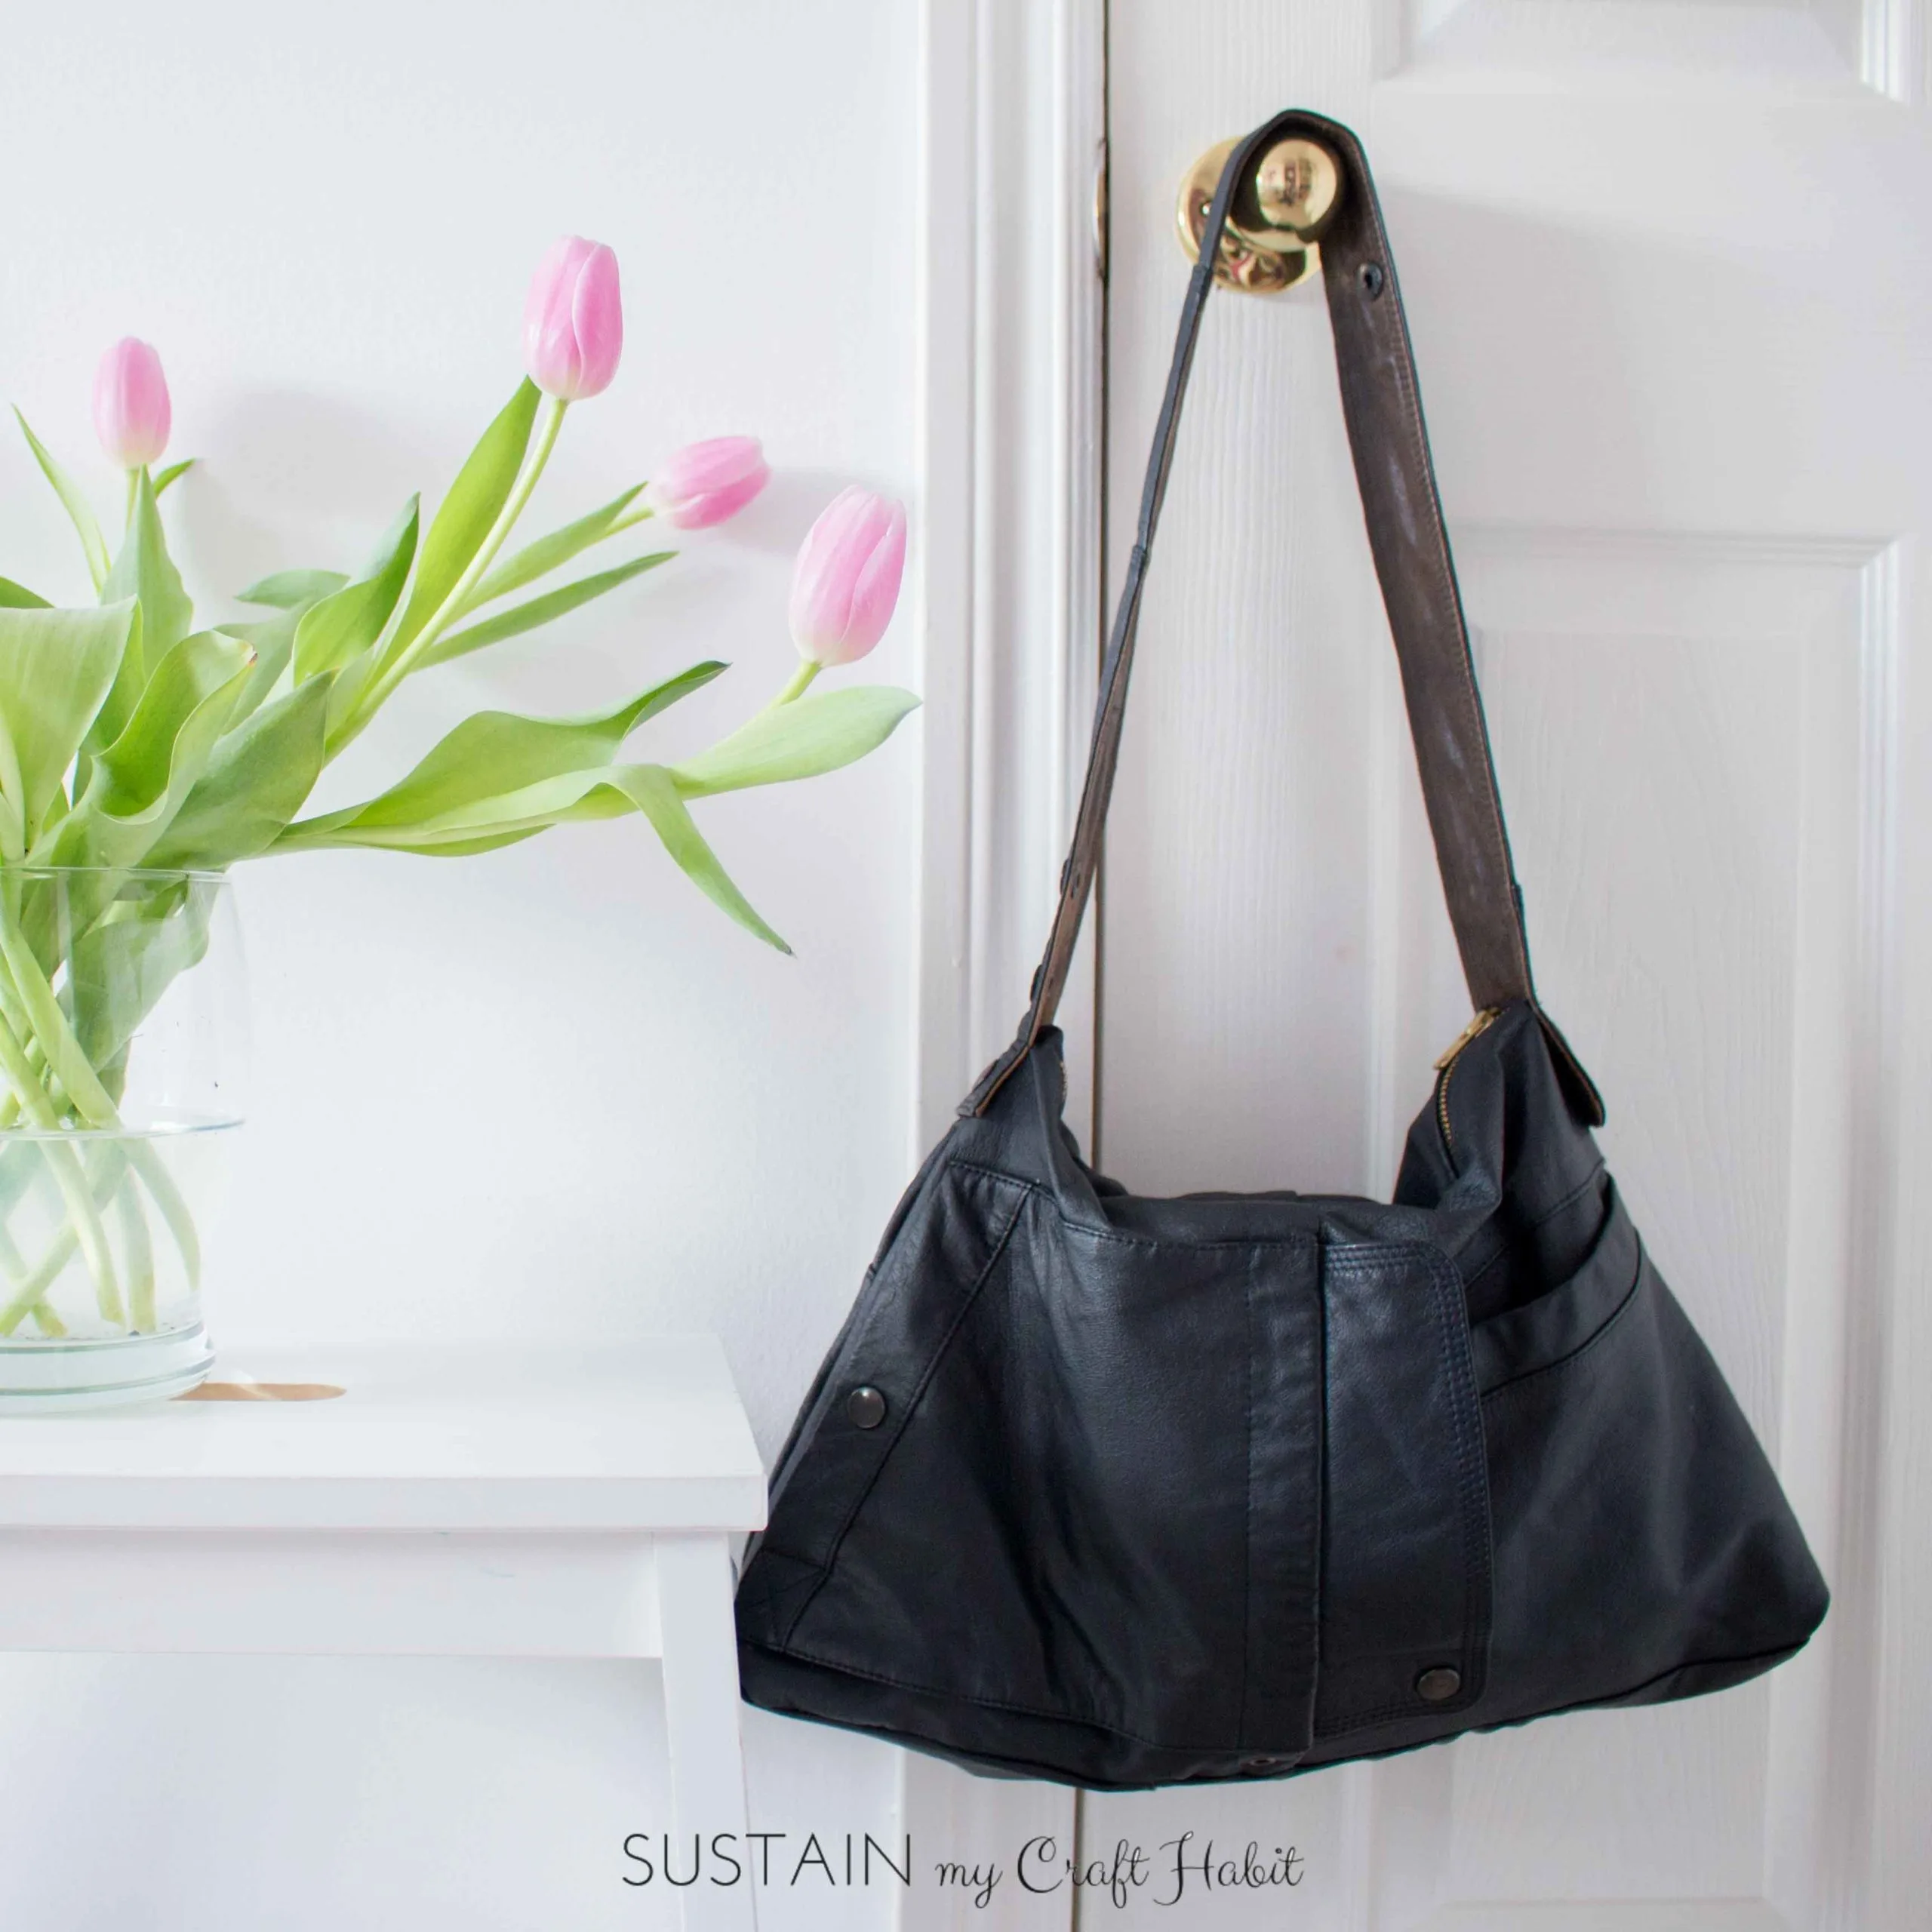 12+ recycled leather projects to sew - Swoodson Says